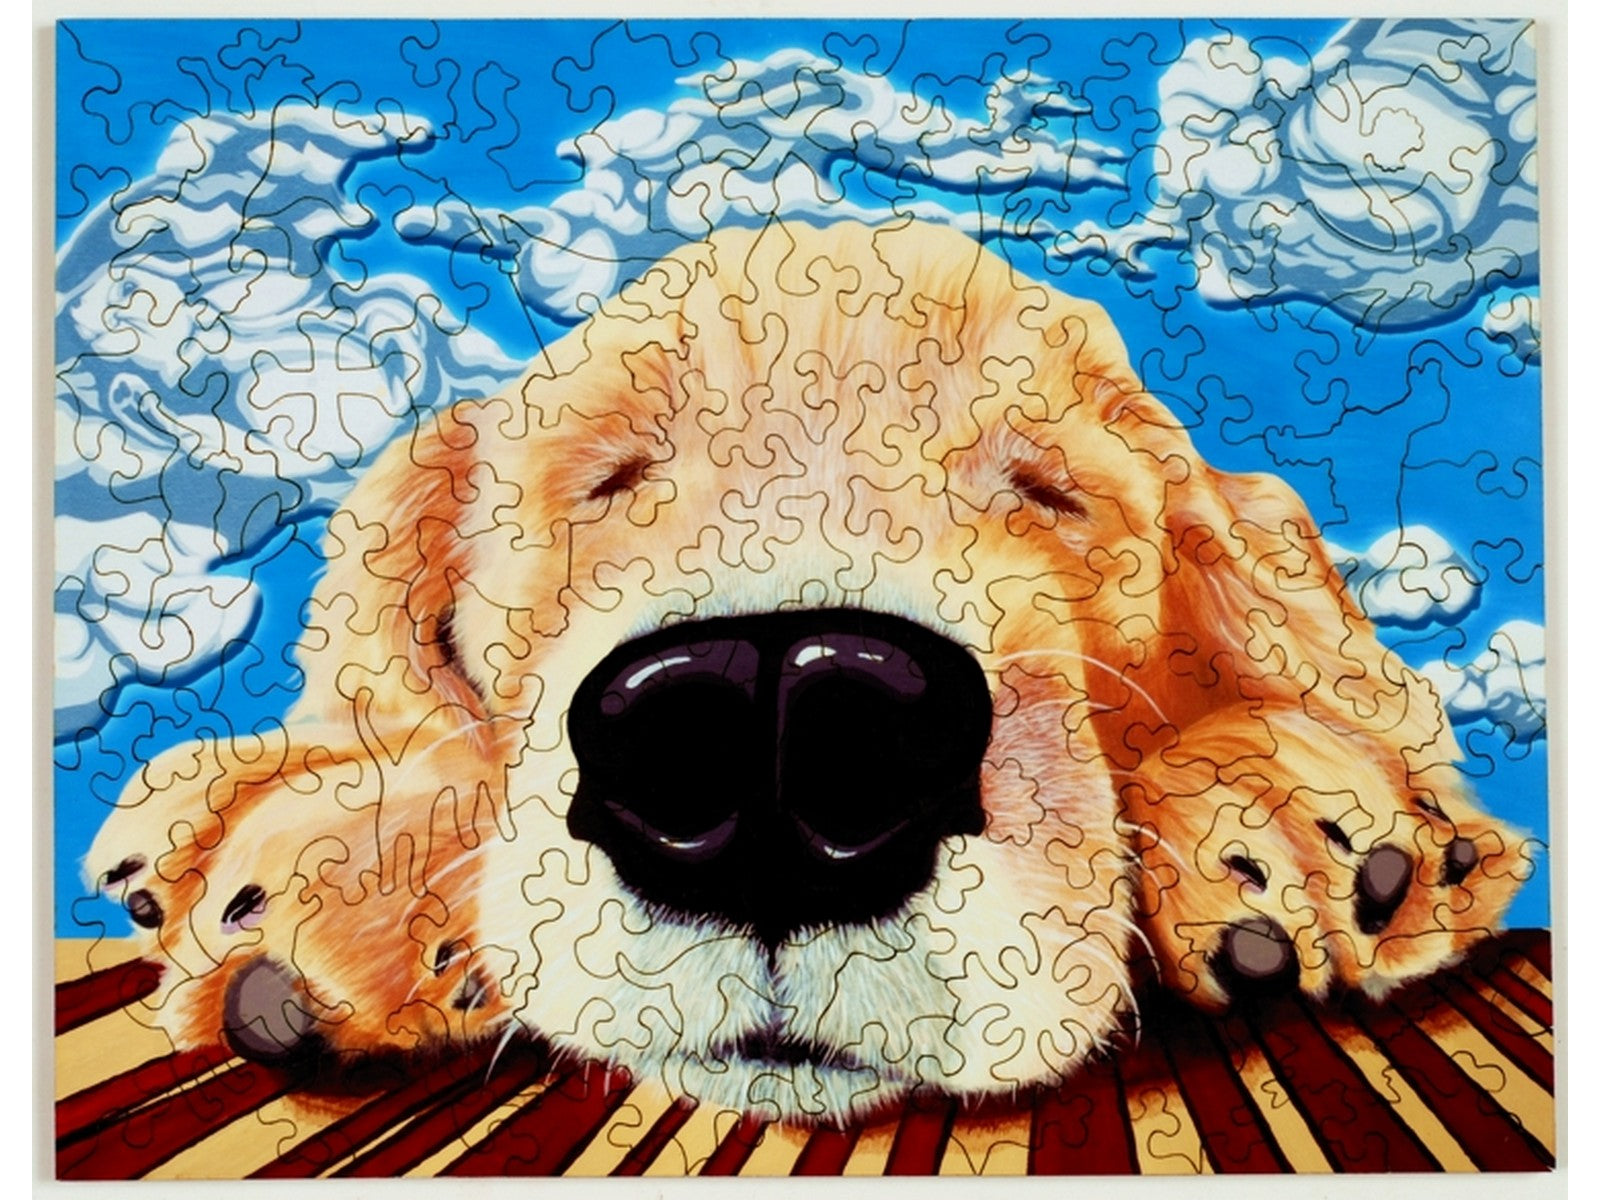 The front of the puzzle, Merlin, which shows a puppy sleeping.